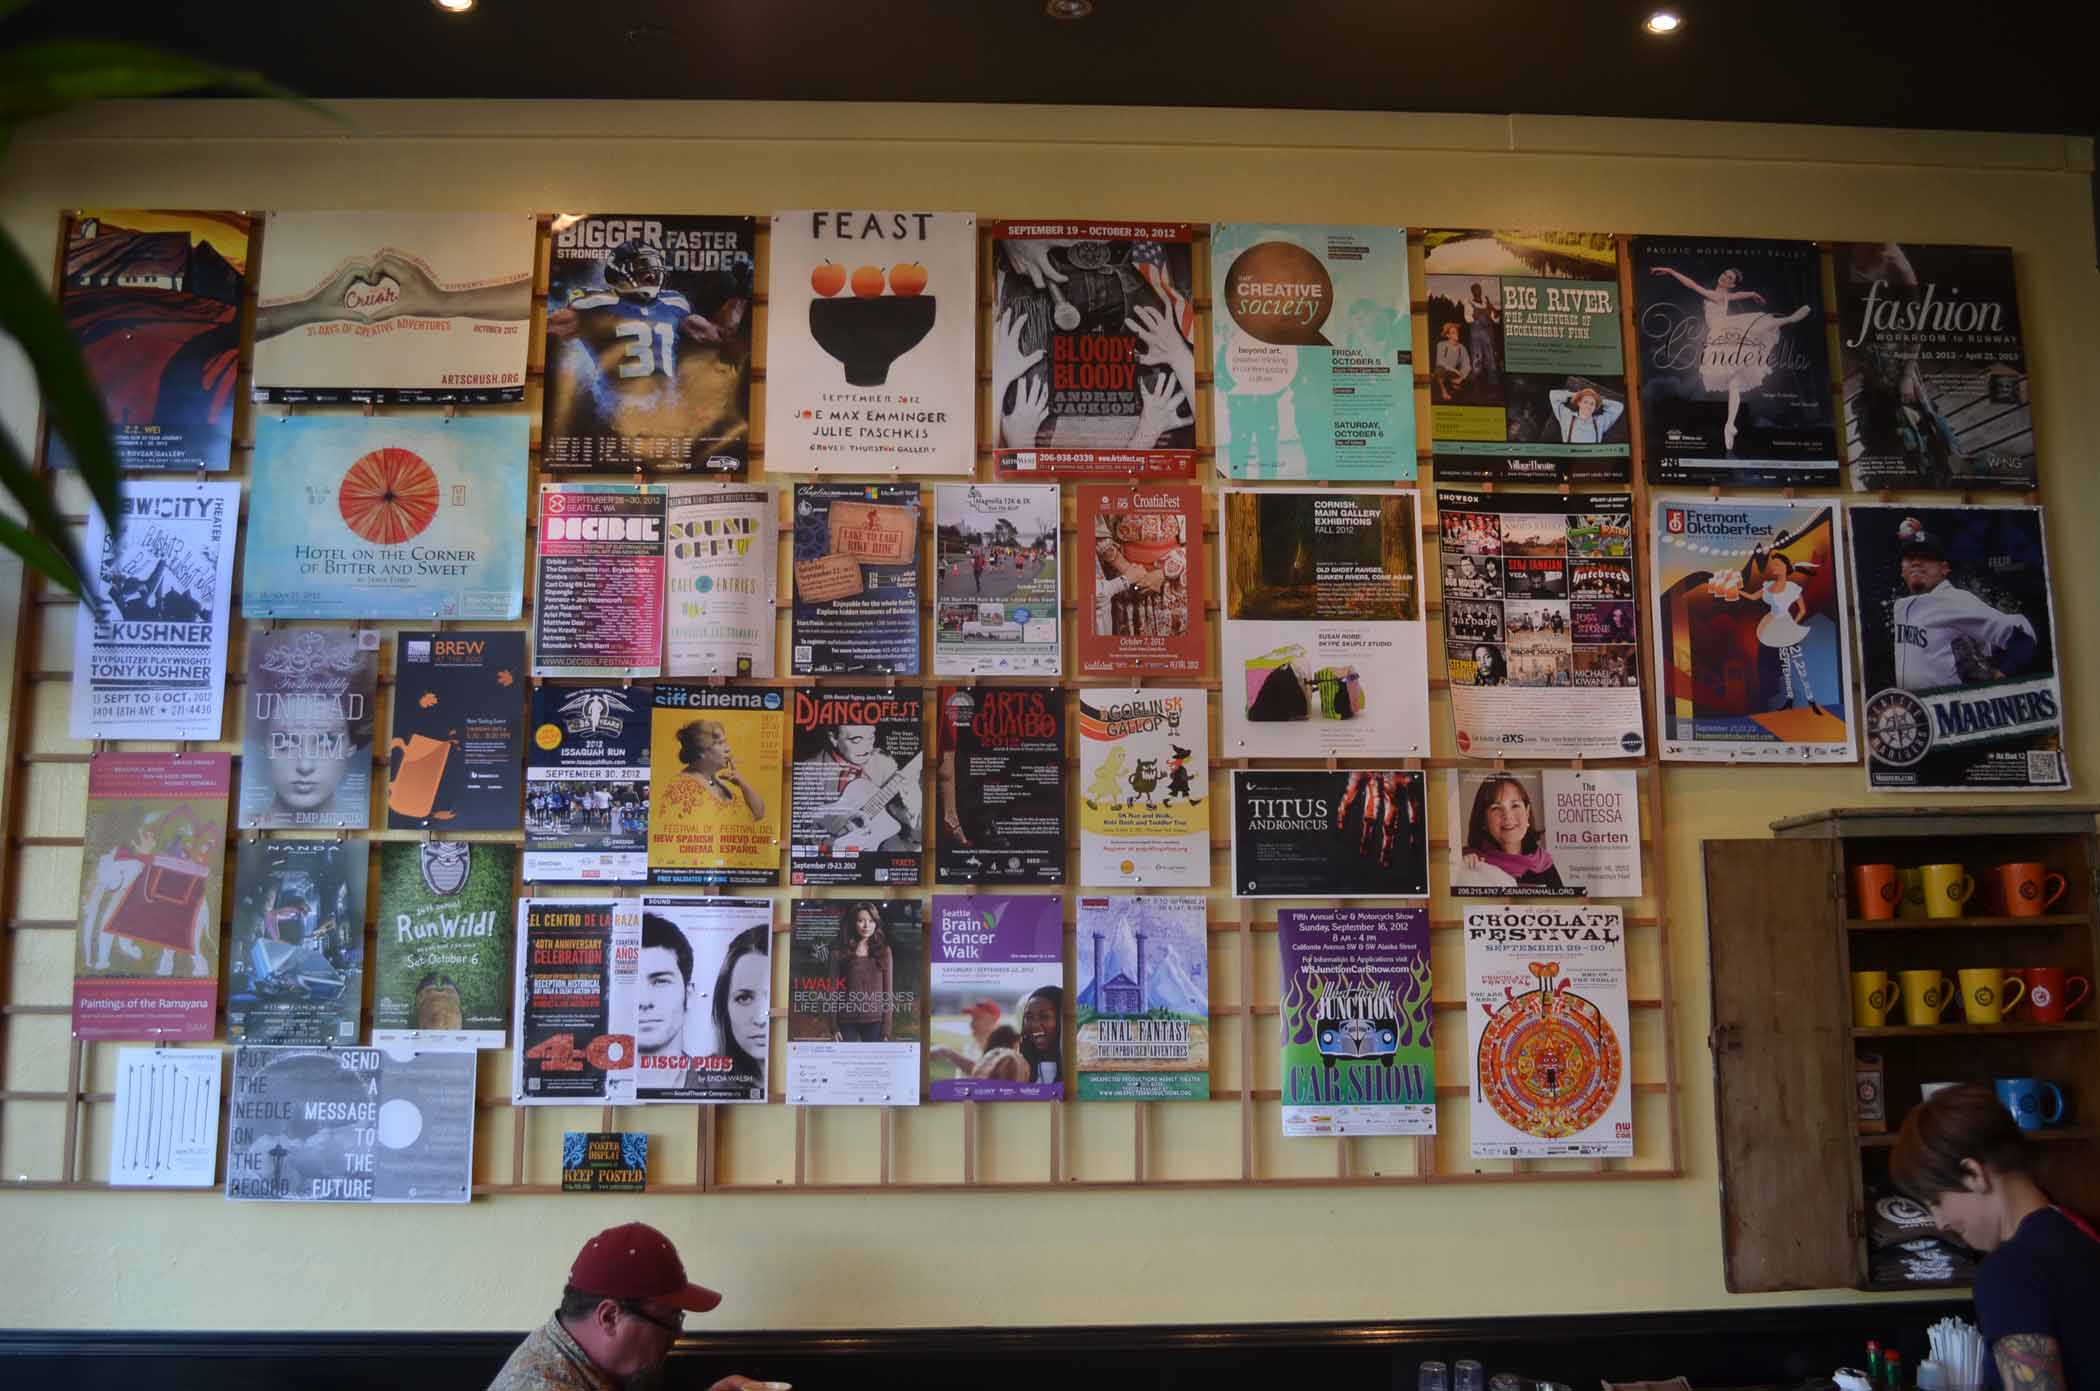 Seattle Cafe near Five Points Wall of Events